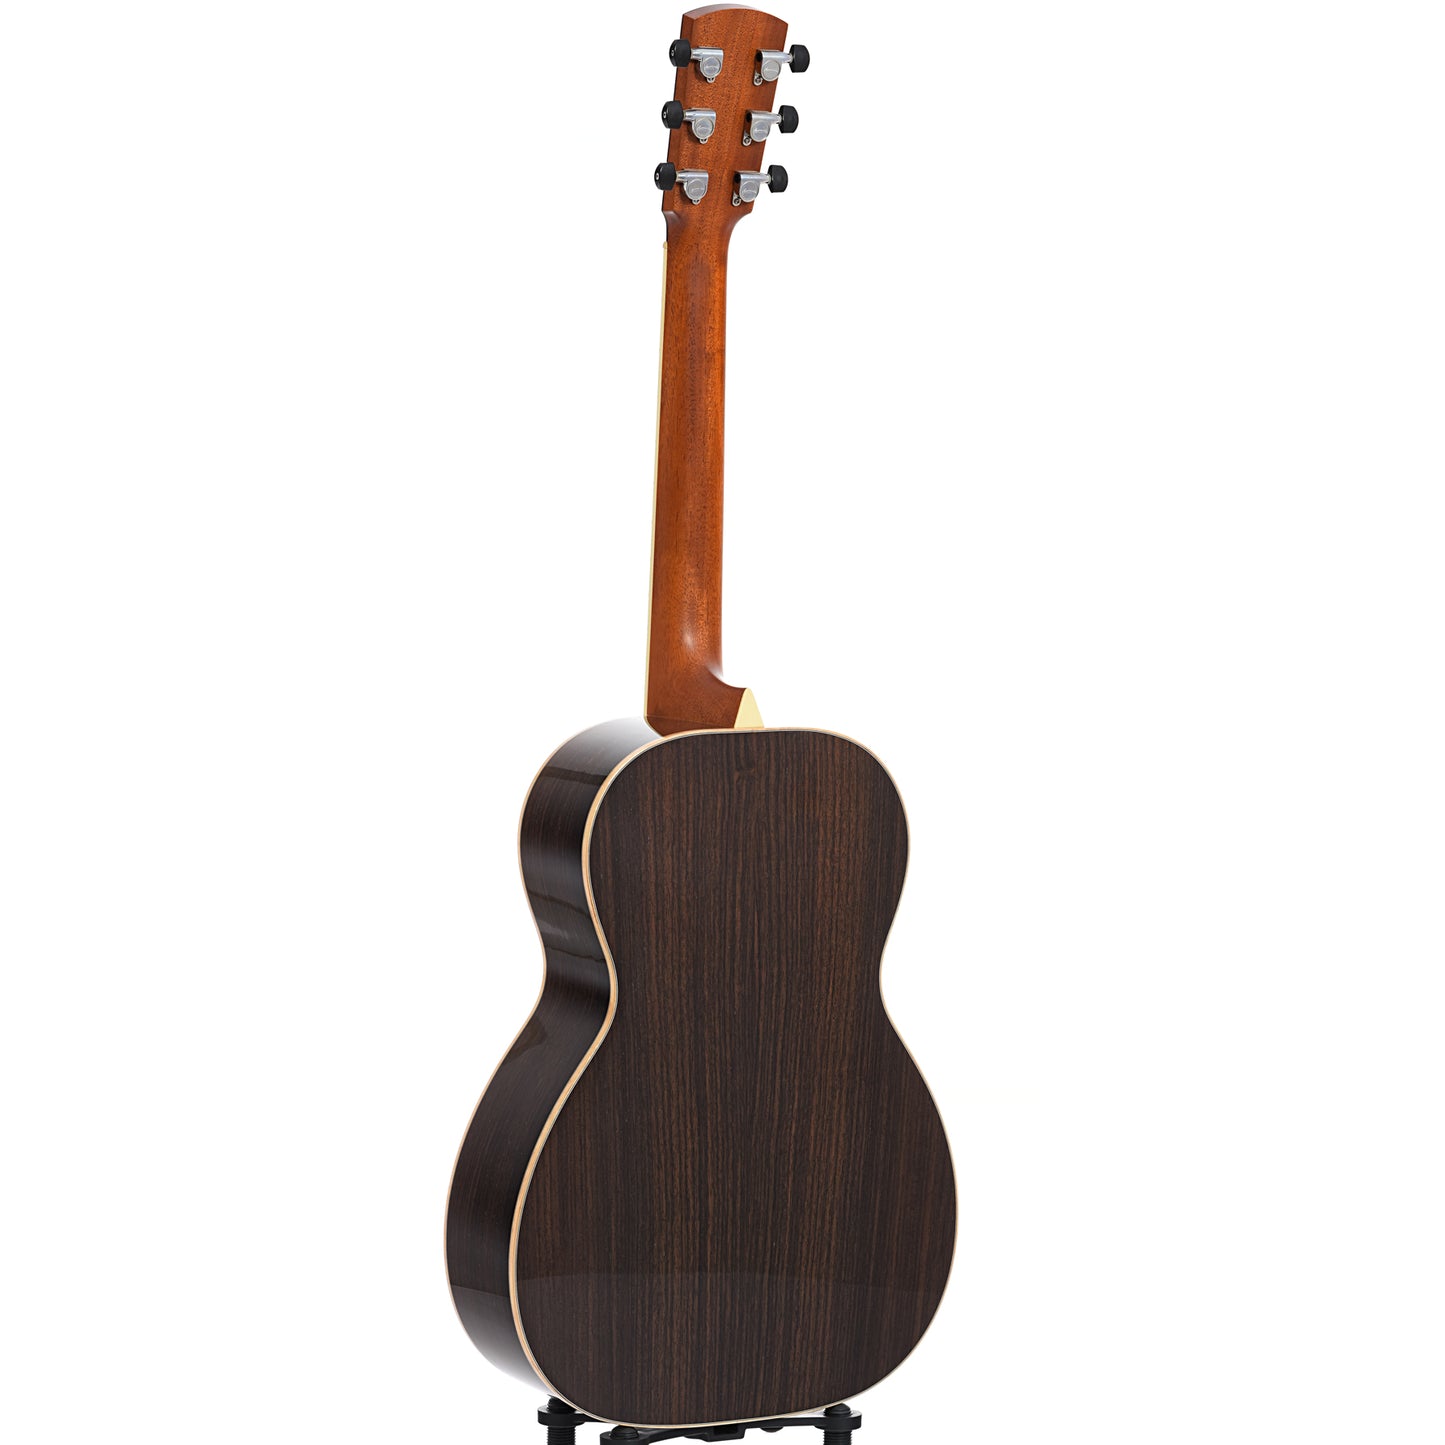 Full back and side of Larrivee P-09 Parlor Acoustic